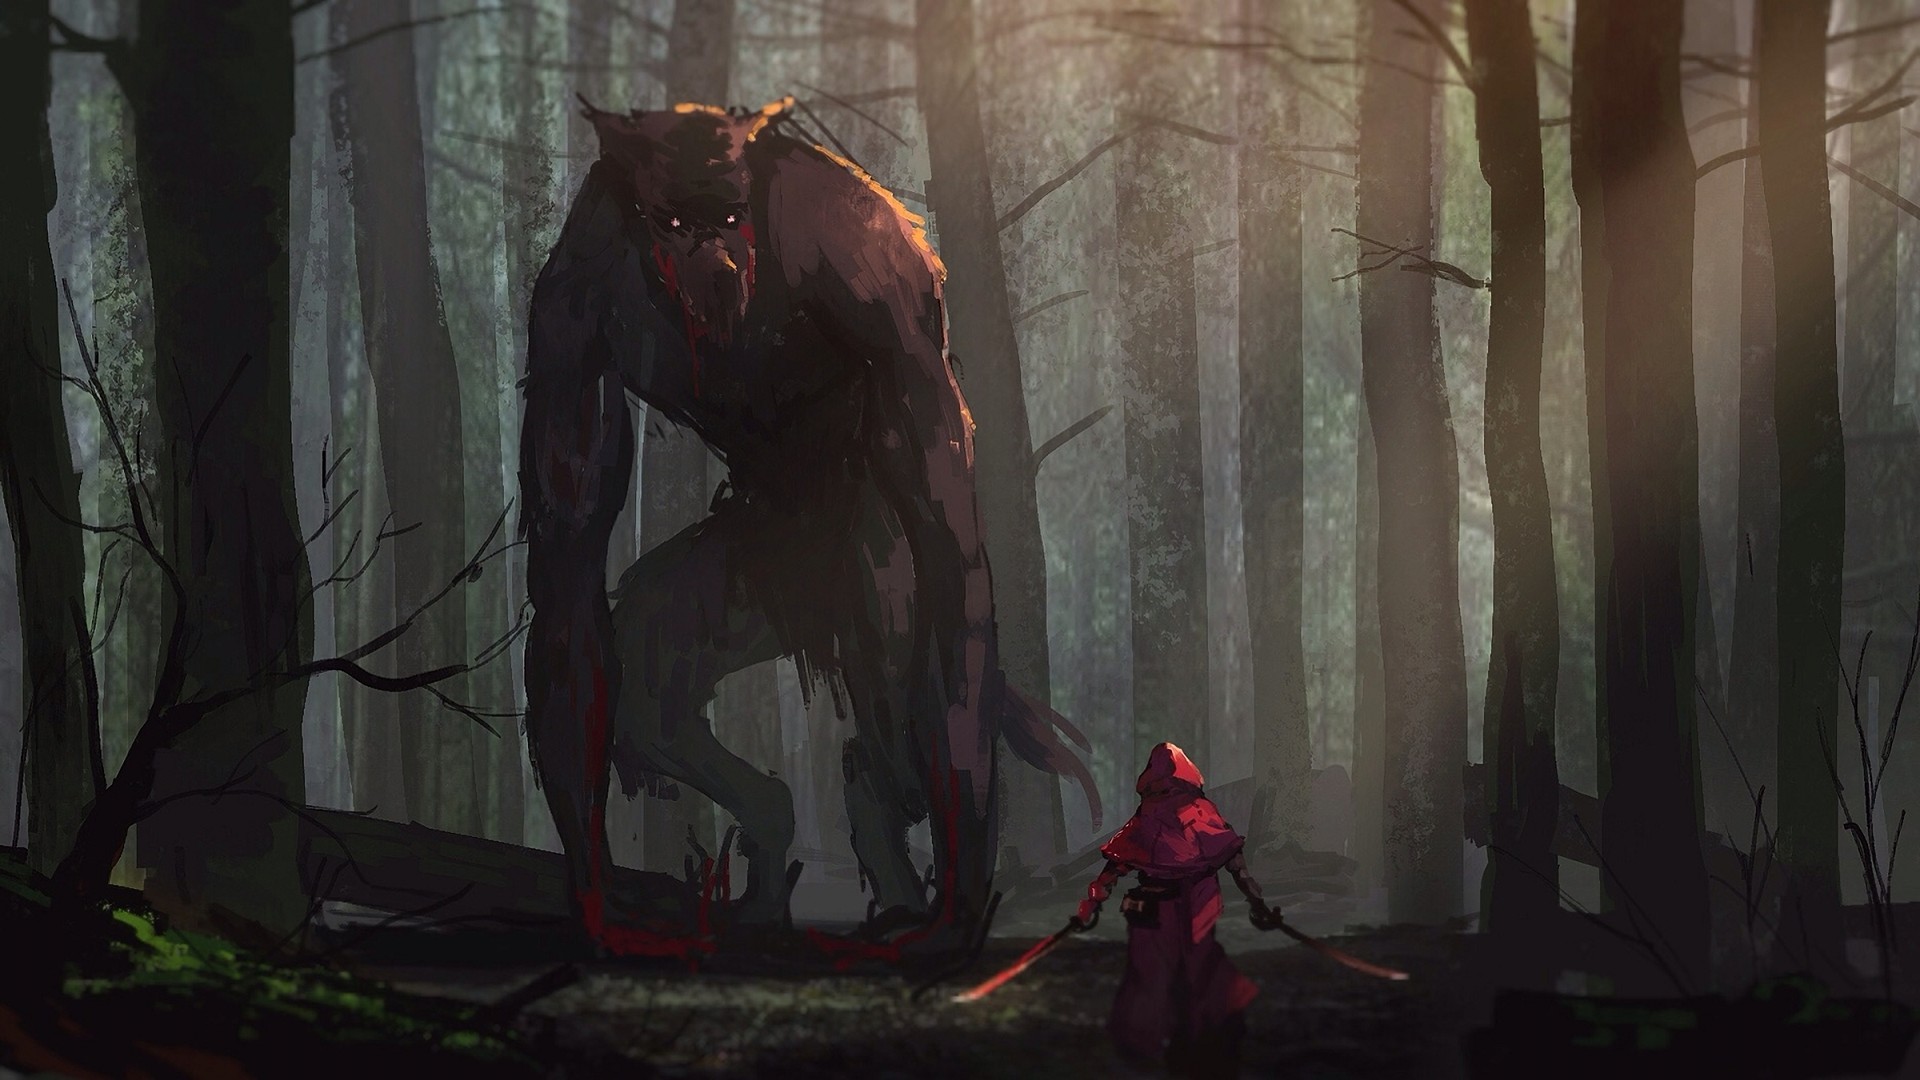 Red Riding Hood Gets Fucked The Big Bad Wolf